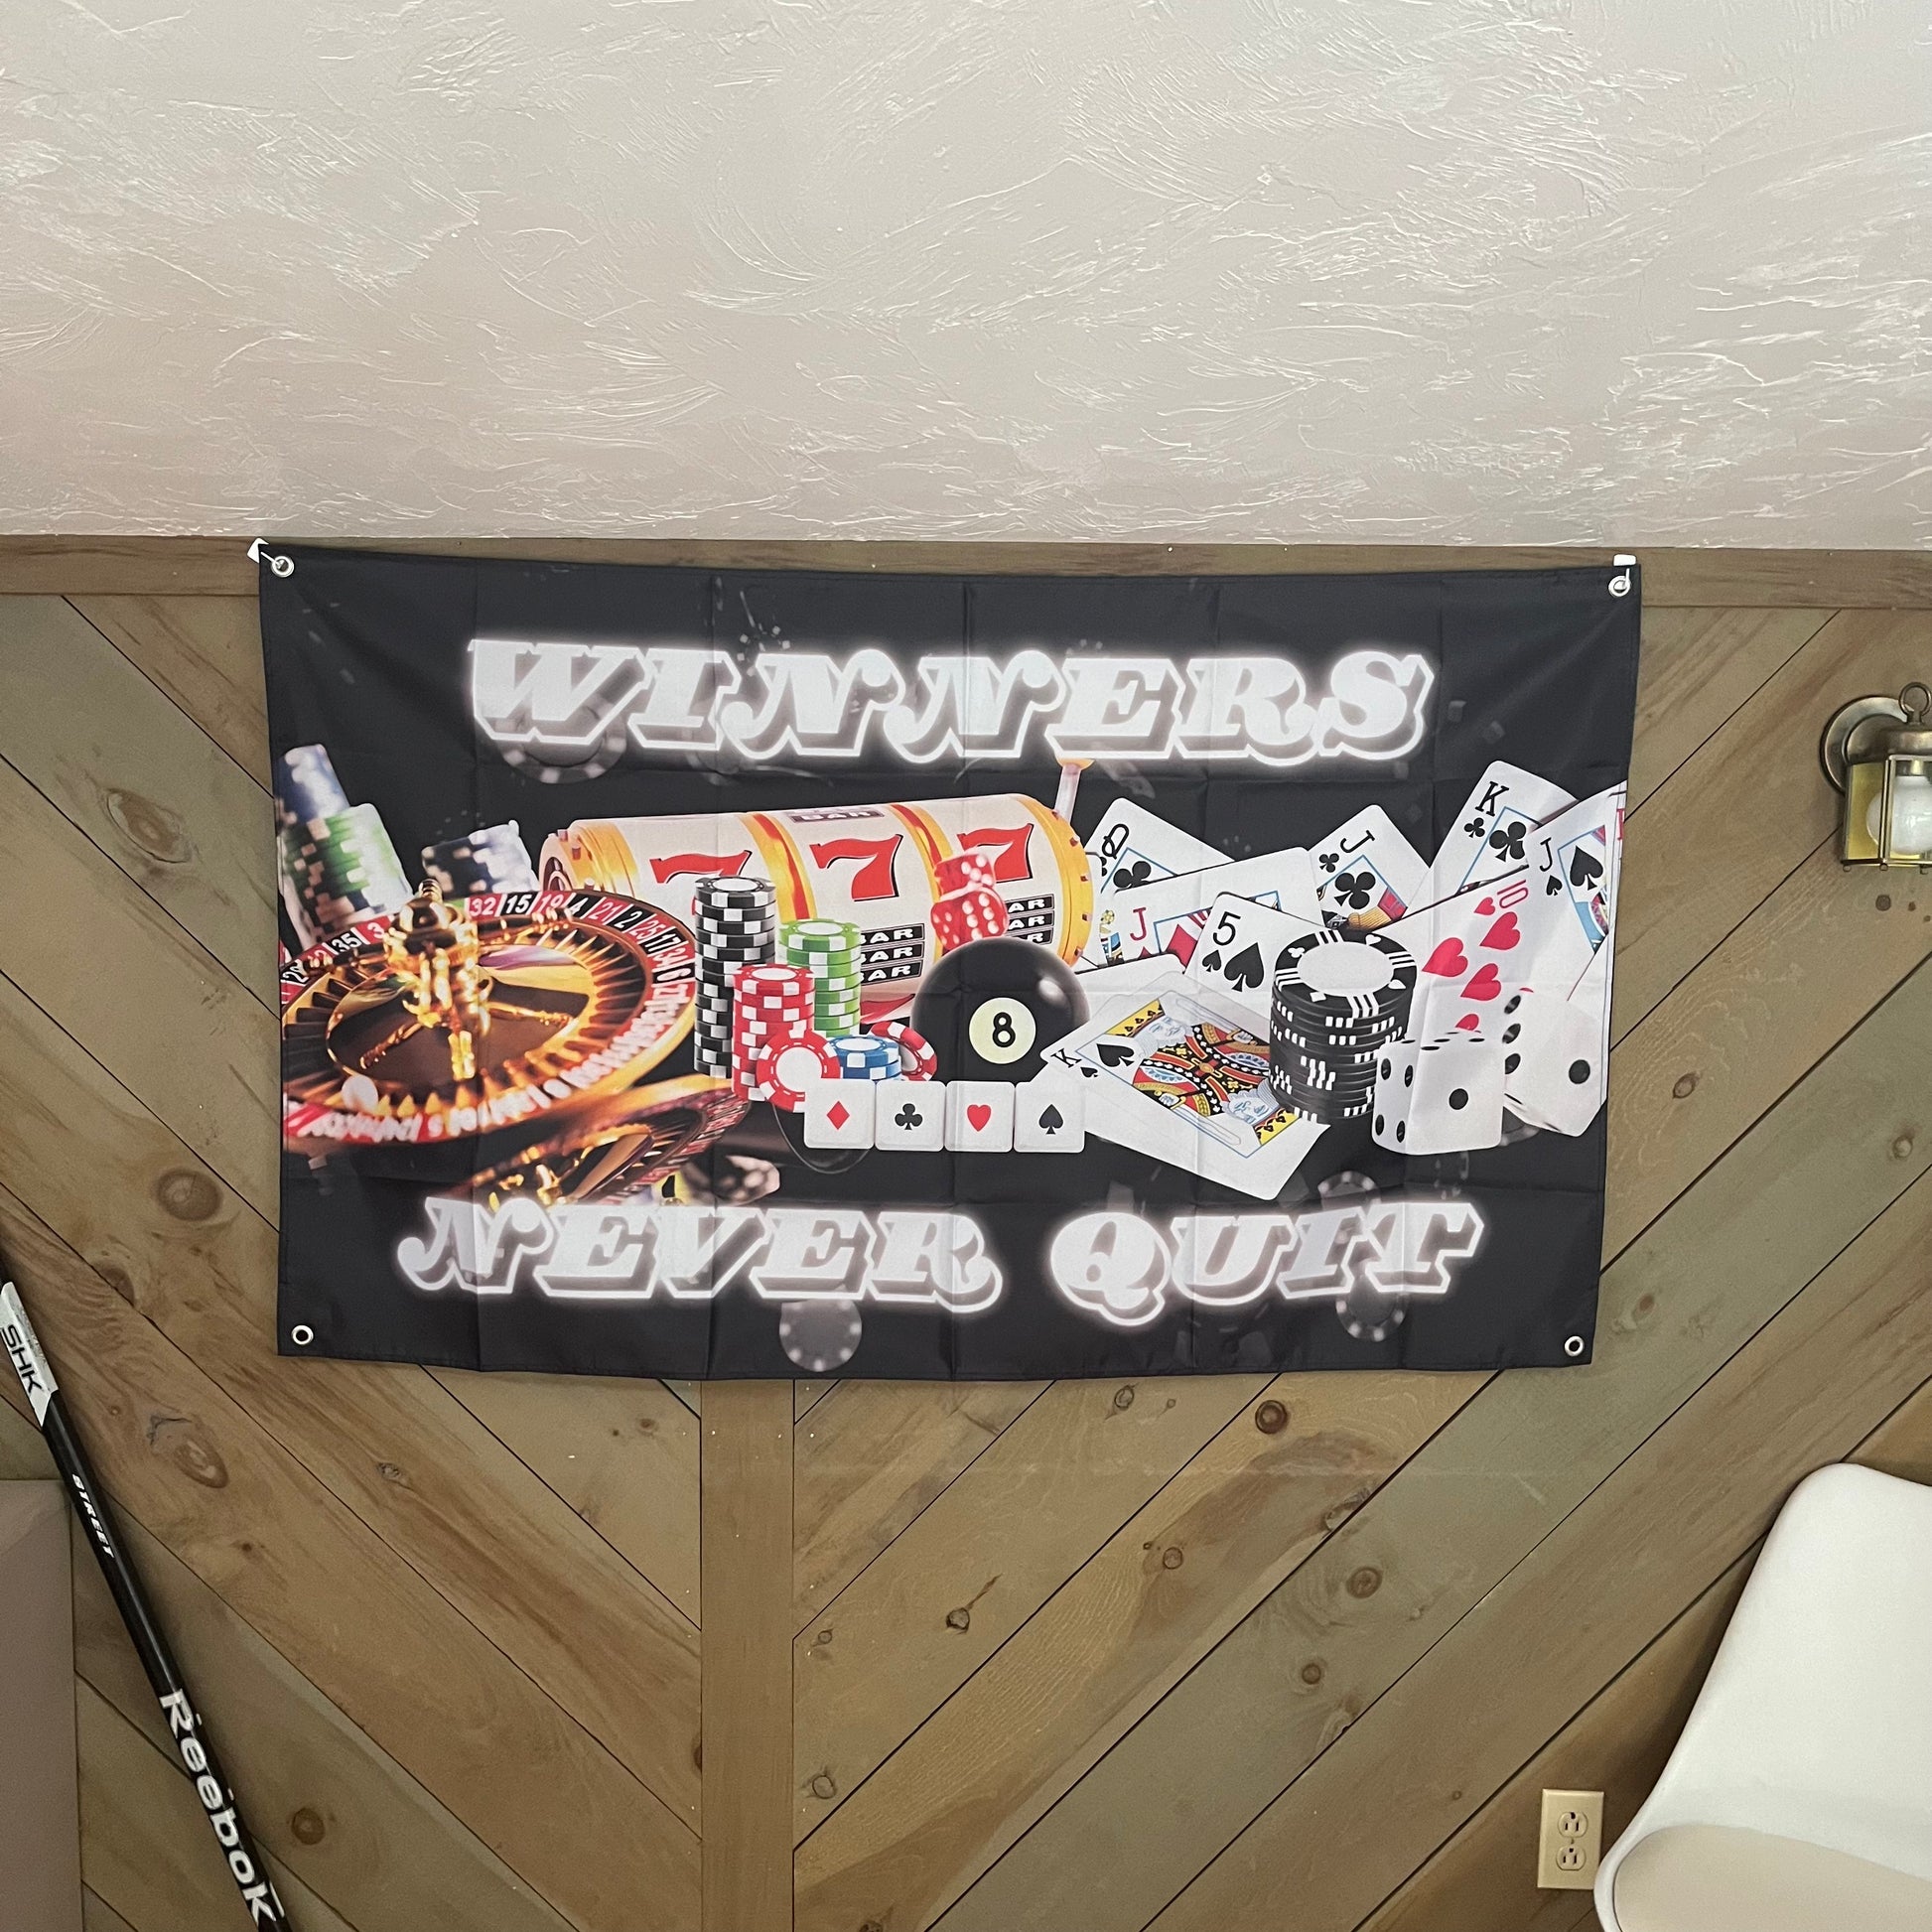 Funny gambling flag displayed in a stylish room, emphasizing the colorful casino-themed design and motivational text, perfect for game rooms and party decorations.